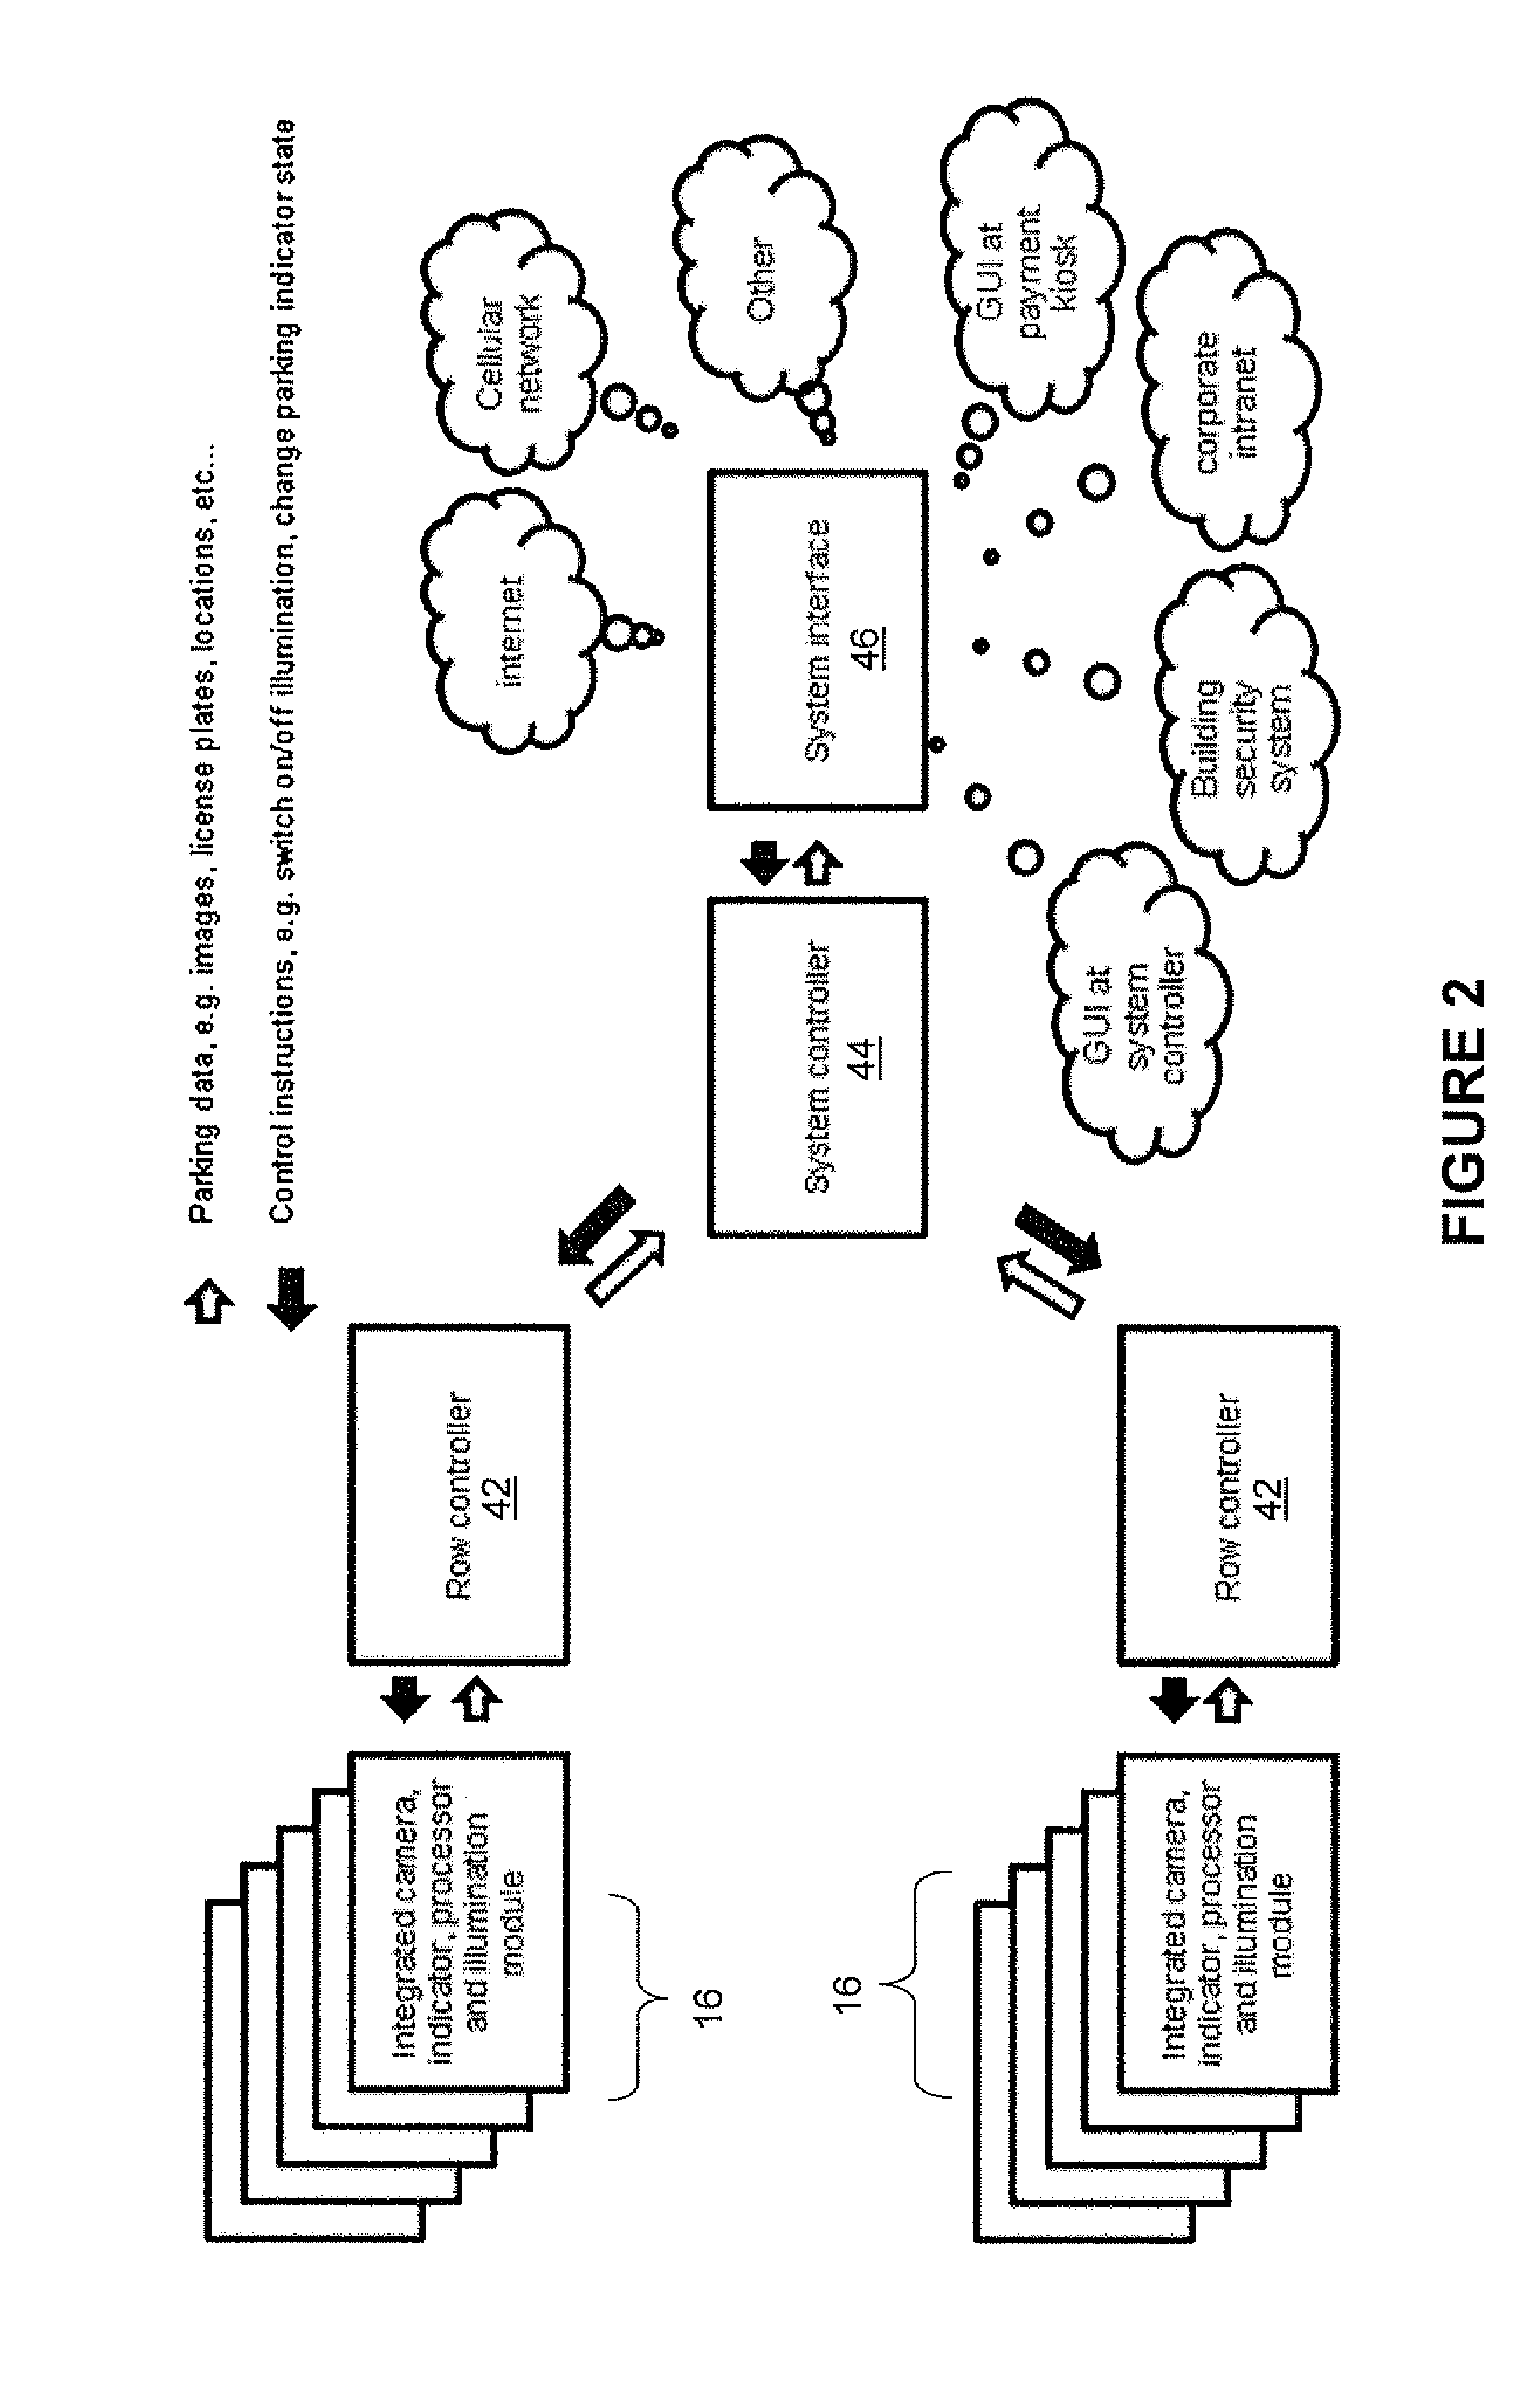 Method and system for managing a parking lot based on intelligent imaging